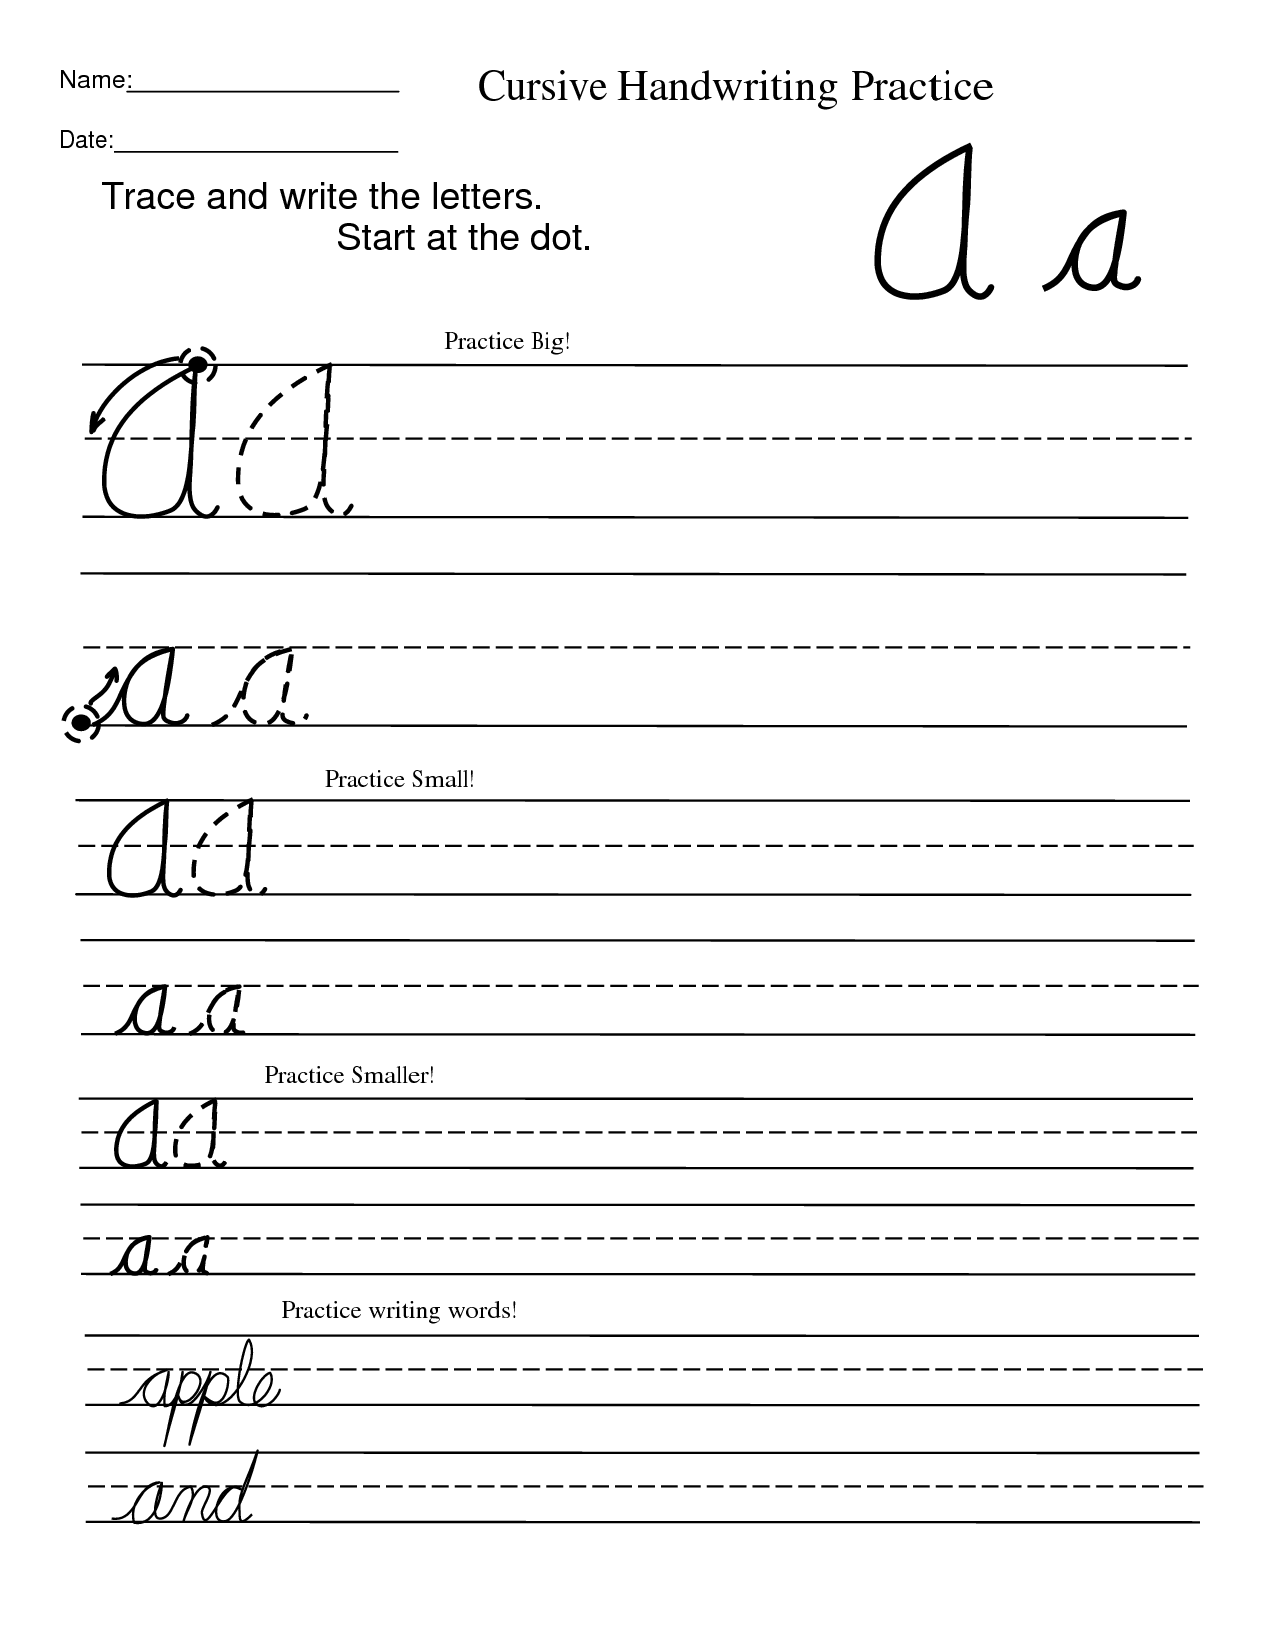 tracing-cursive-letters-worksheets-free-alphabetworksheetsfree